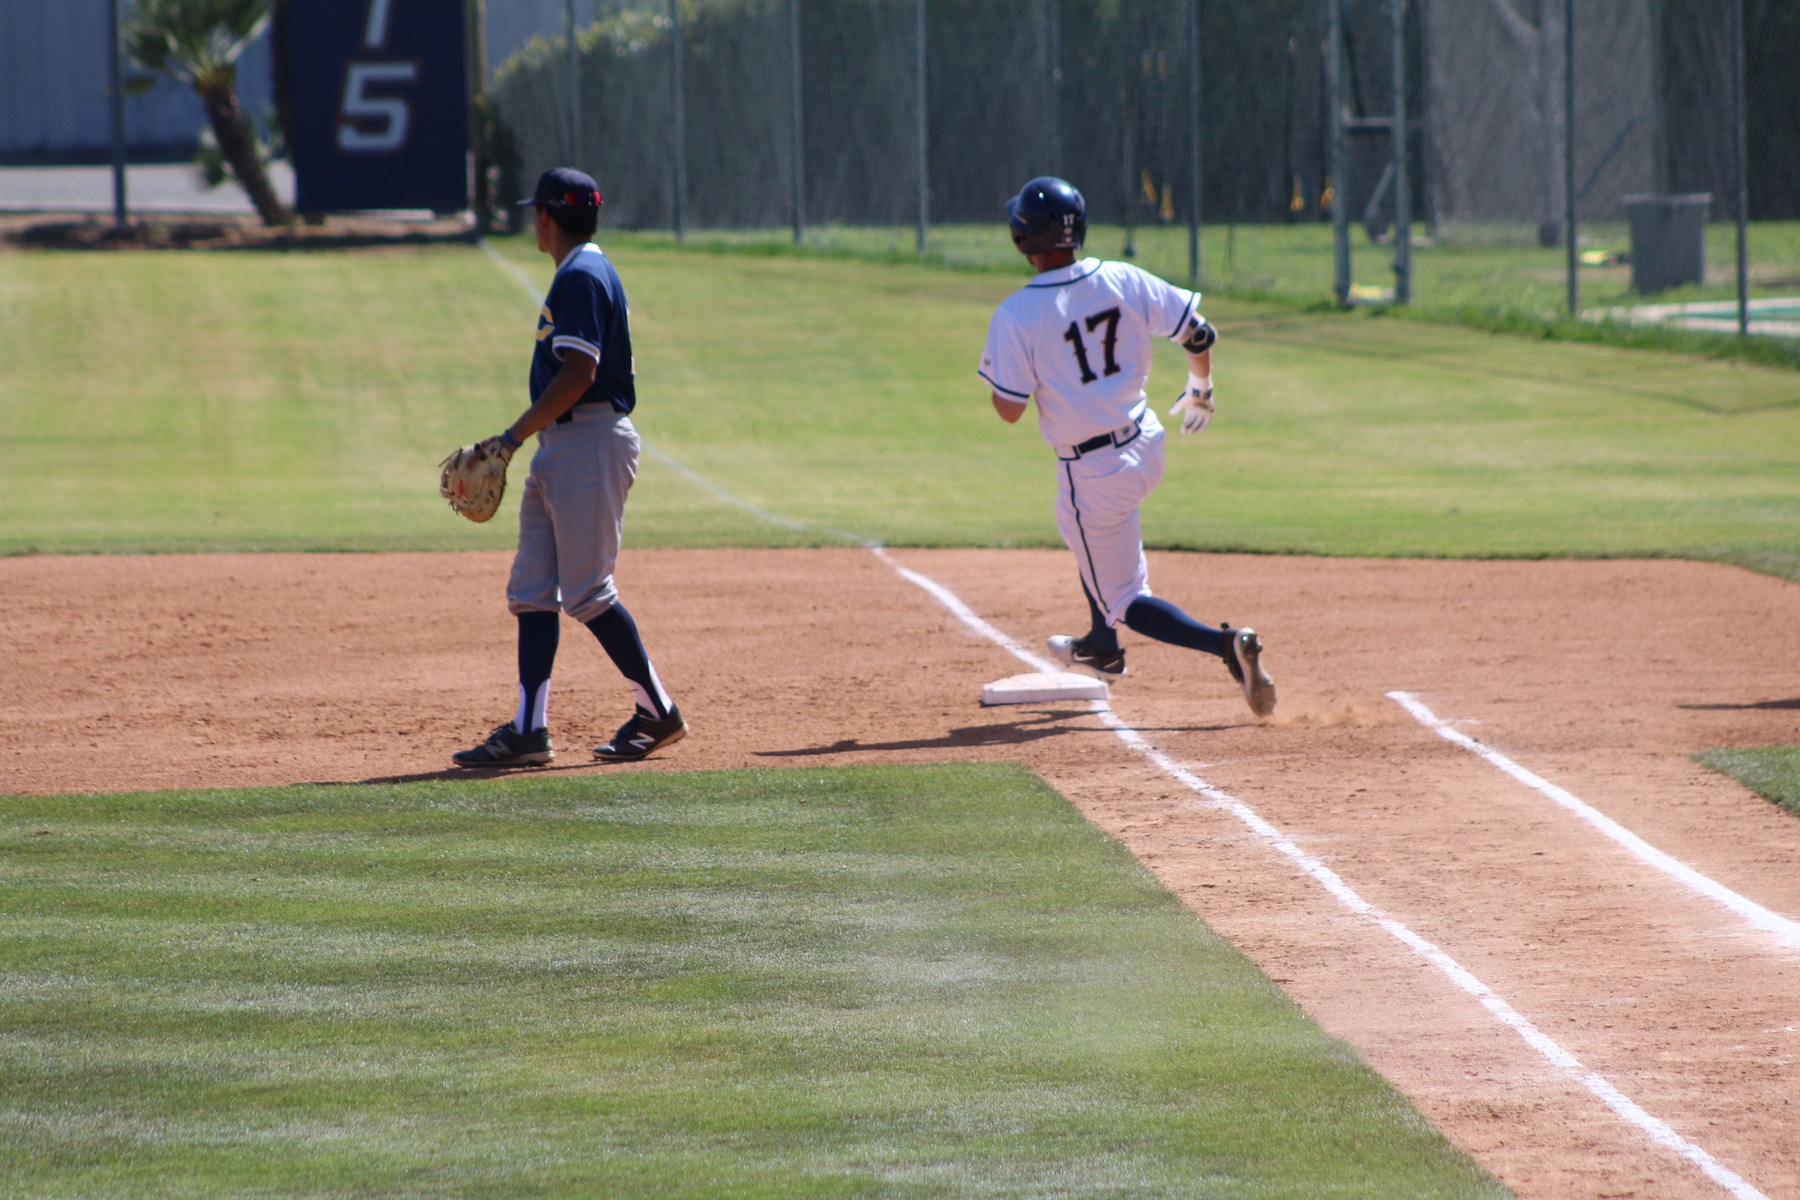 Thomas Chavez rounds first base on his way to a double.